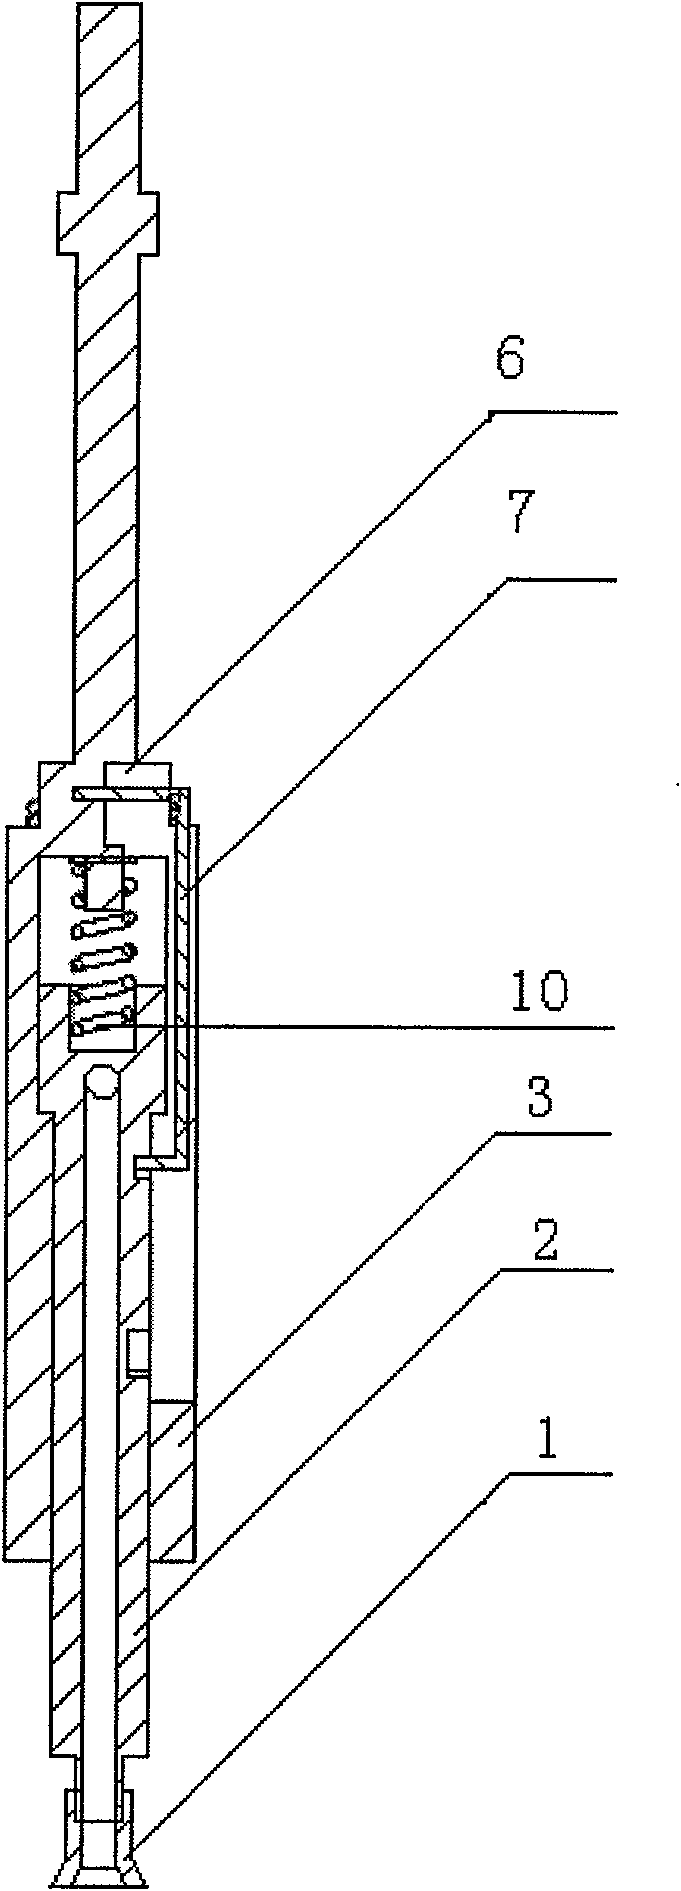 Device for taking and placing chaton automatically